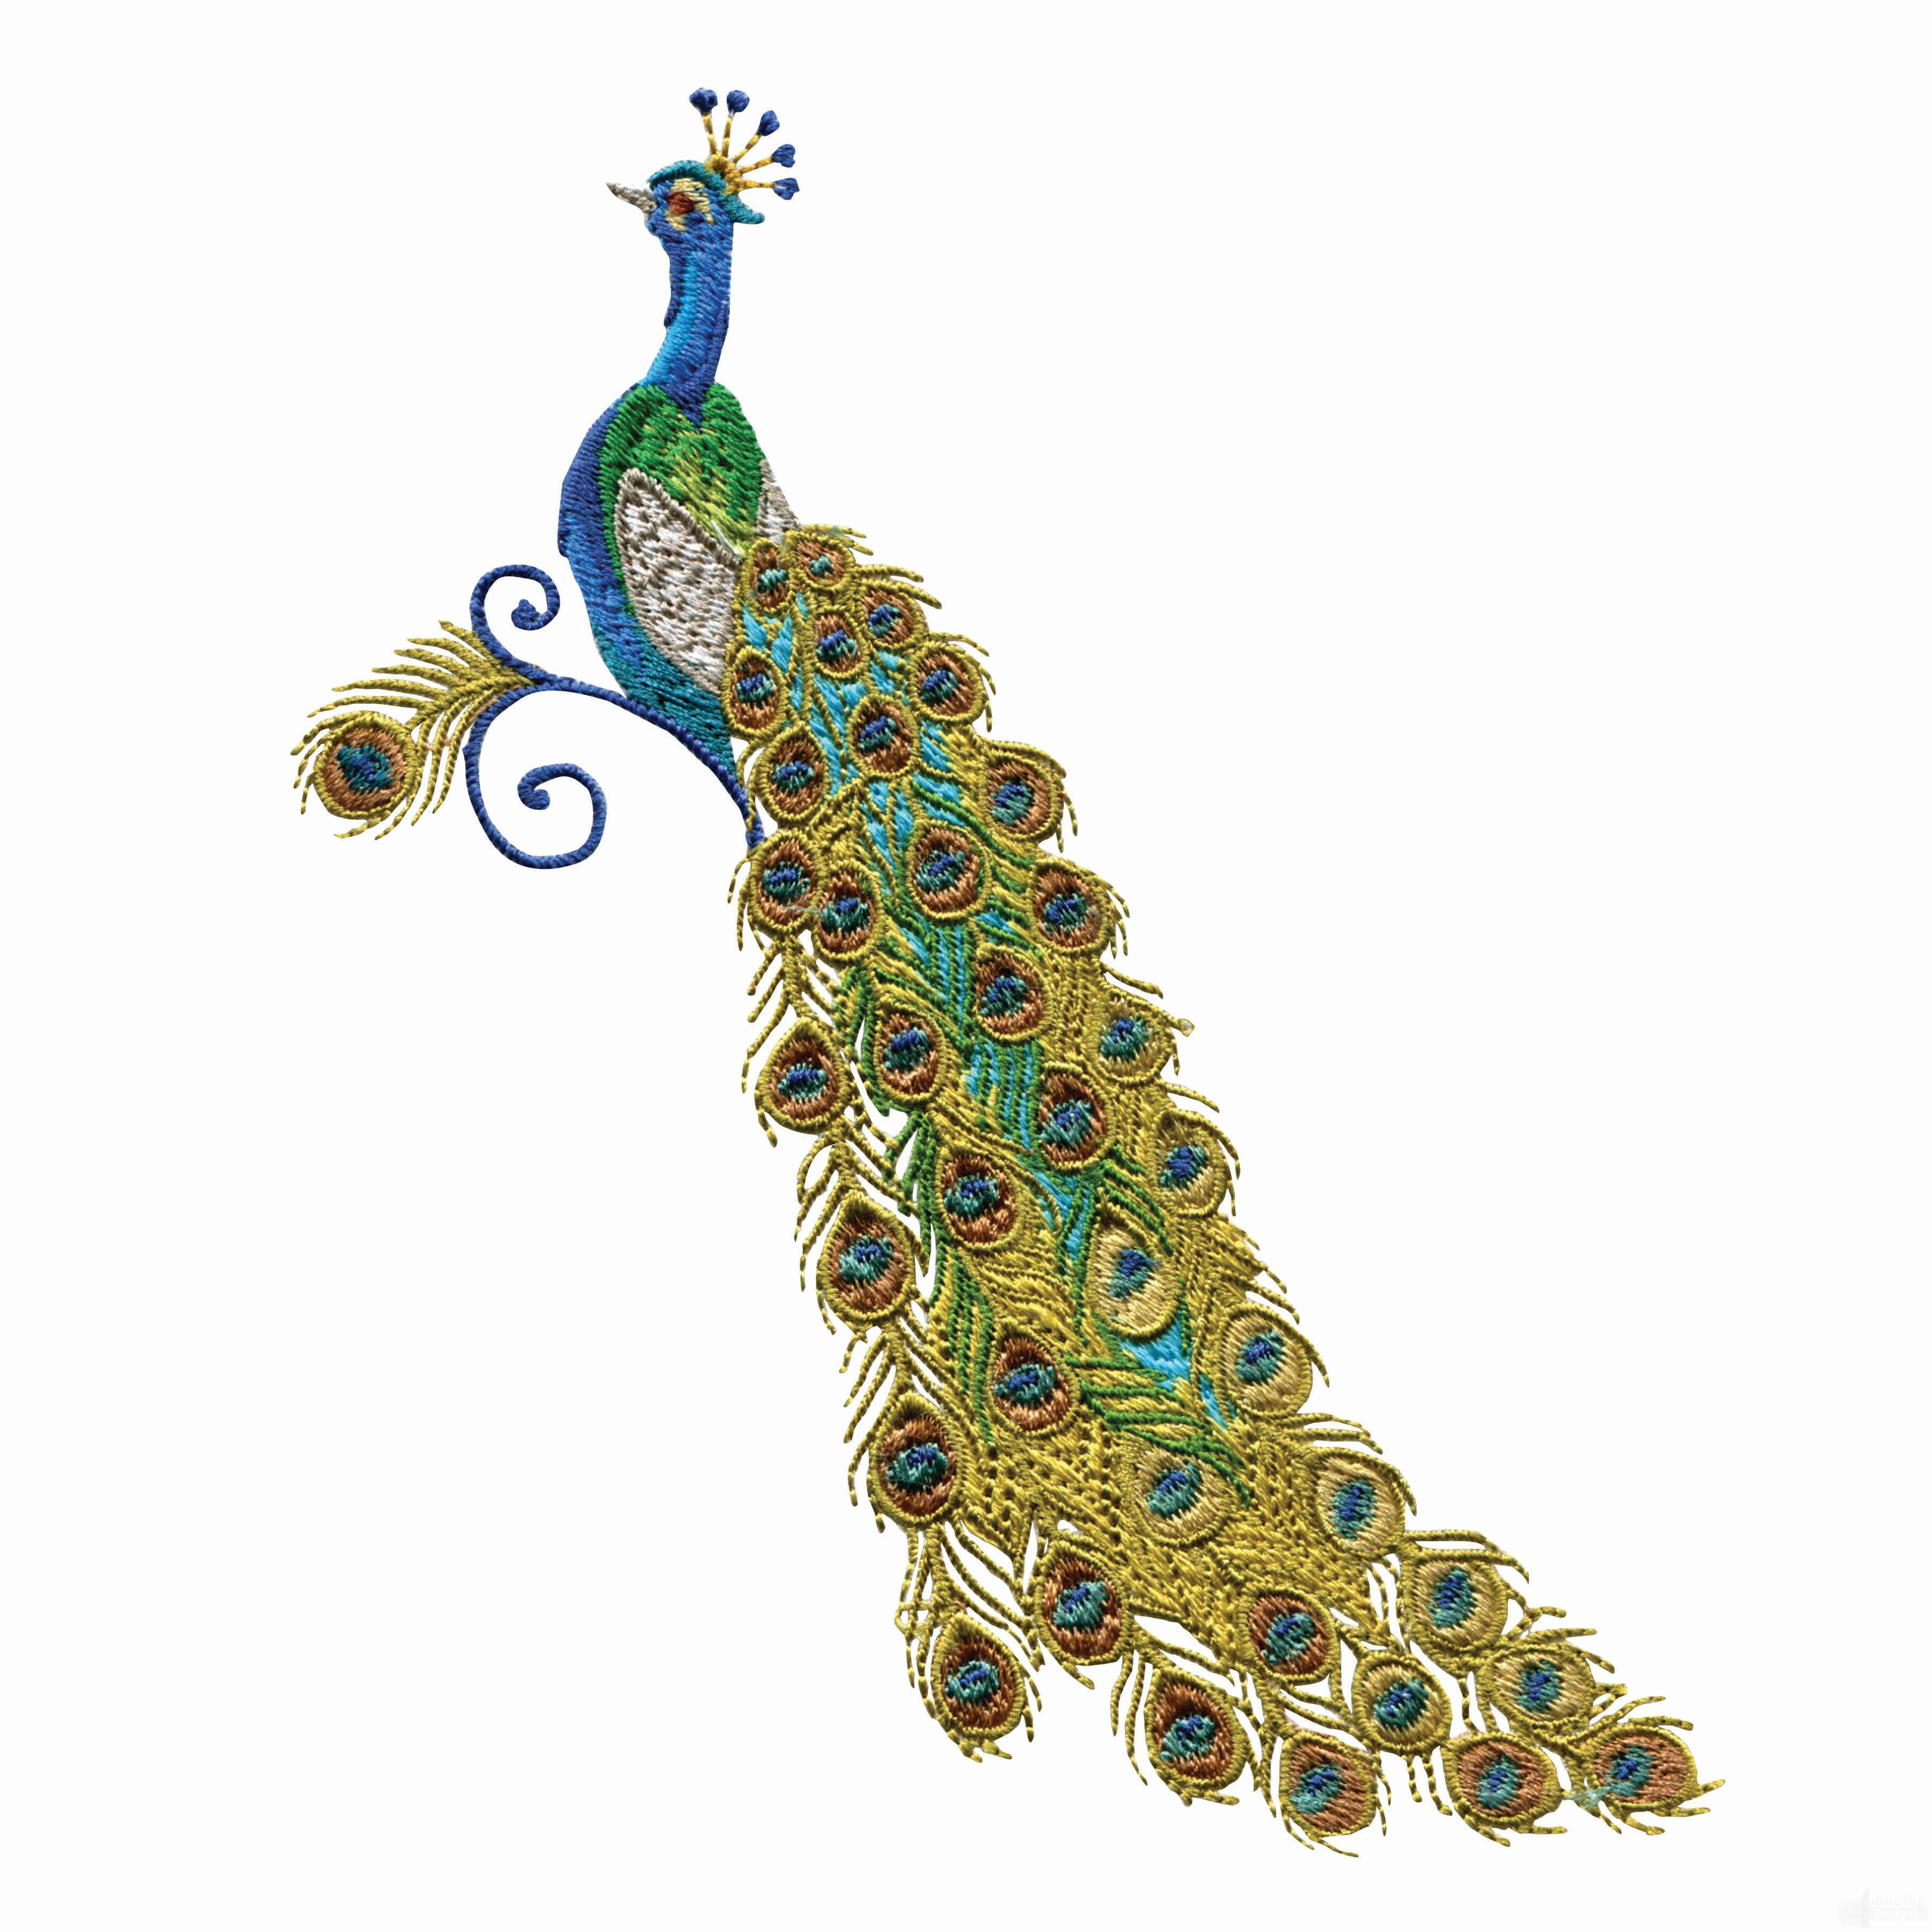 Peacock Embroidery Patterns 15 Best Photos Of Peacock Embroidery Patterns Peacock Embroidery